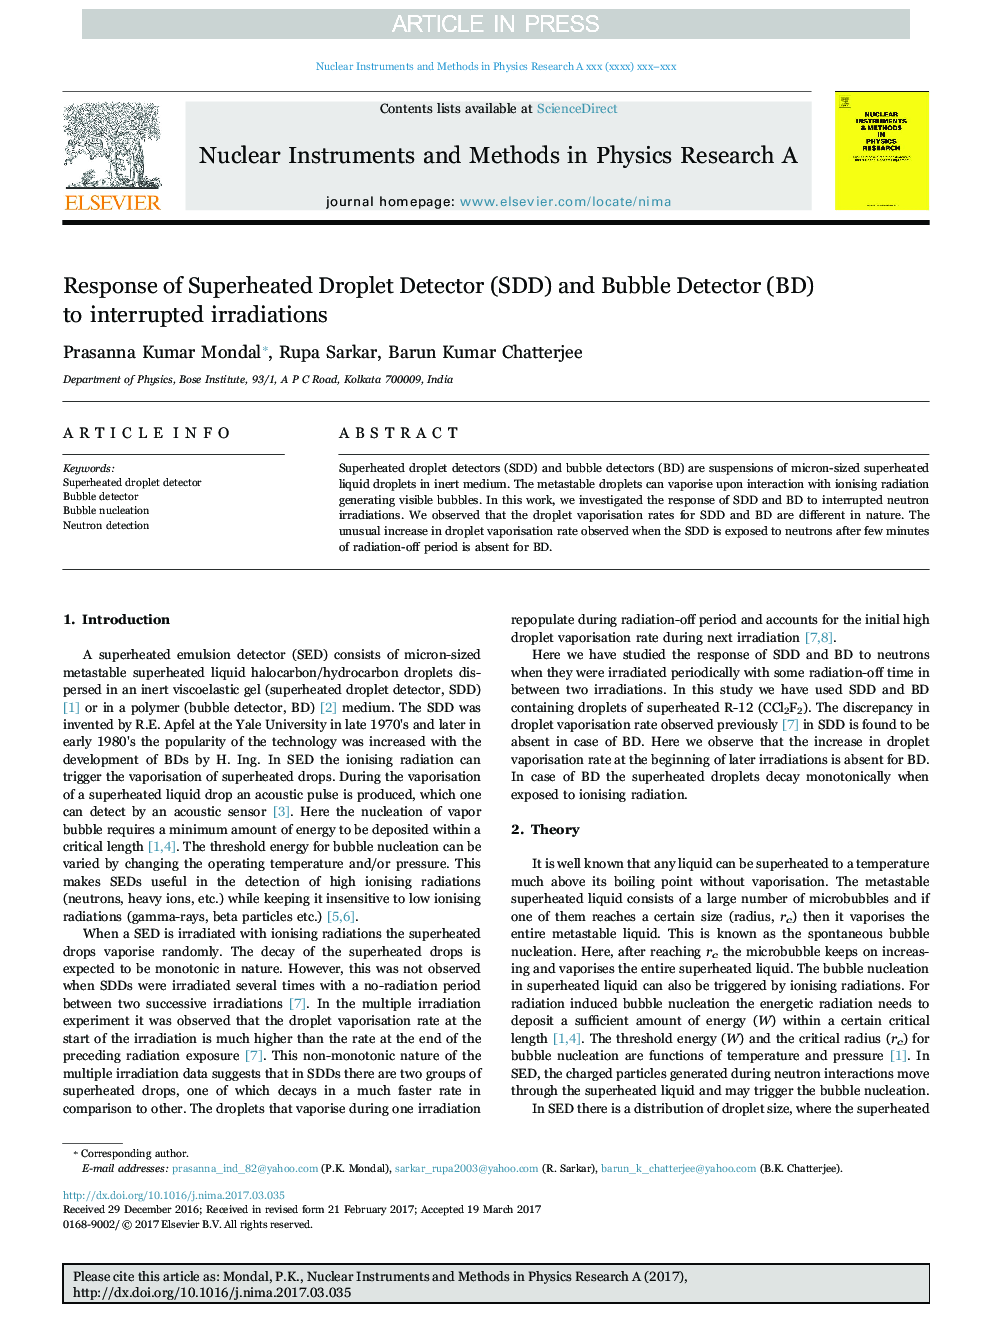 Response of Superheated Droplet Detector (SDD) and Bubble Detector (BD) to interrupted irradiations